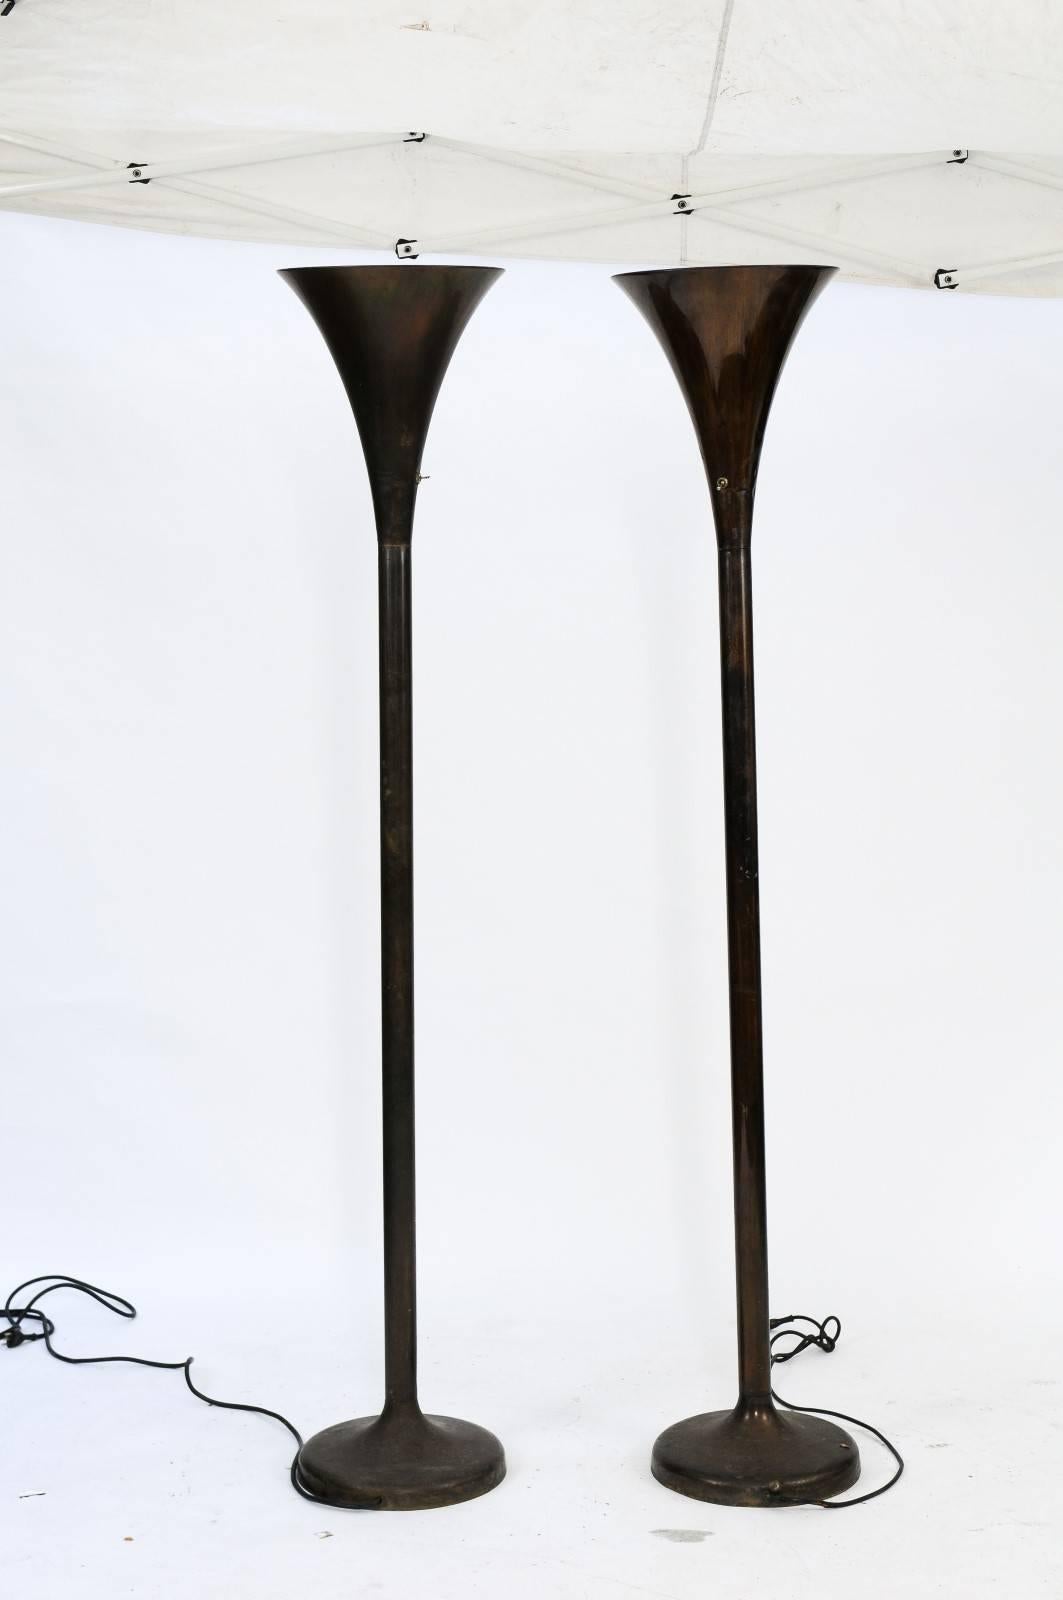 A pair of French black metal torchères floor lamps from the mid-20th century. This pair of 1950s metal torchère lamps had us at the switch! We immediately fell in love with the patina of the metal and the graceful shape and size of the lamps. We can